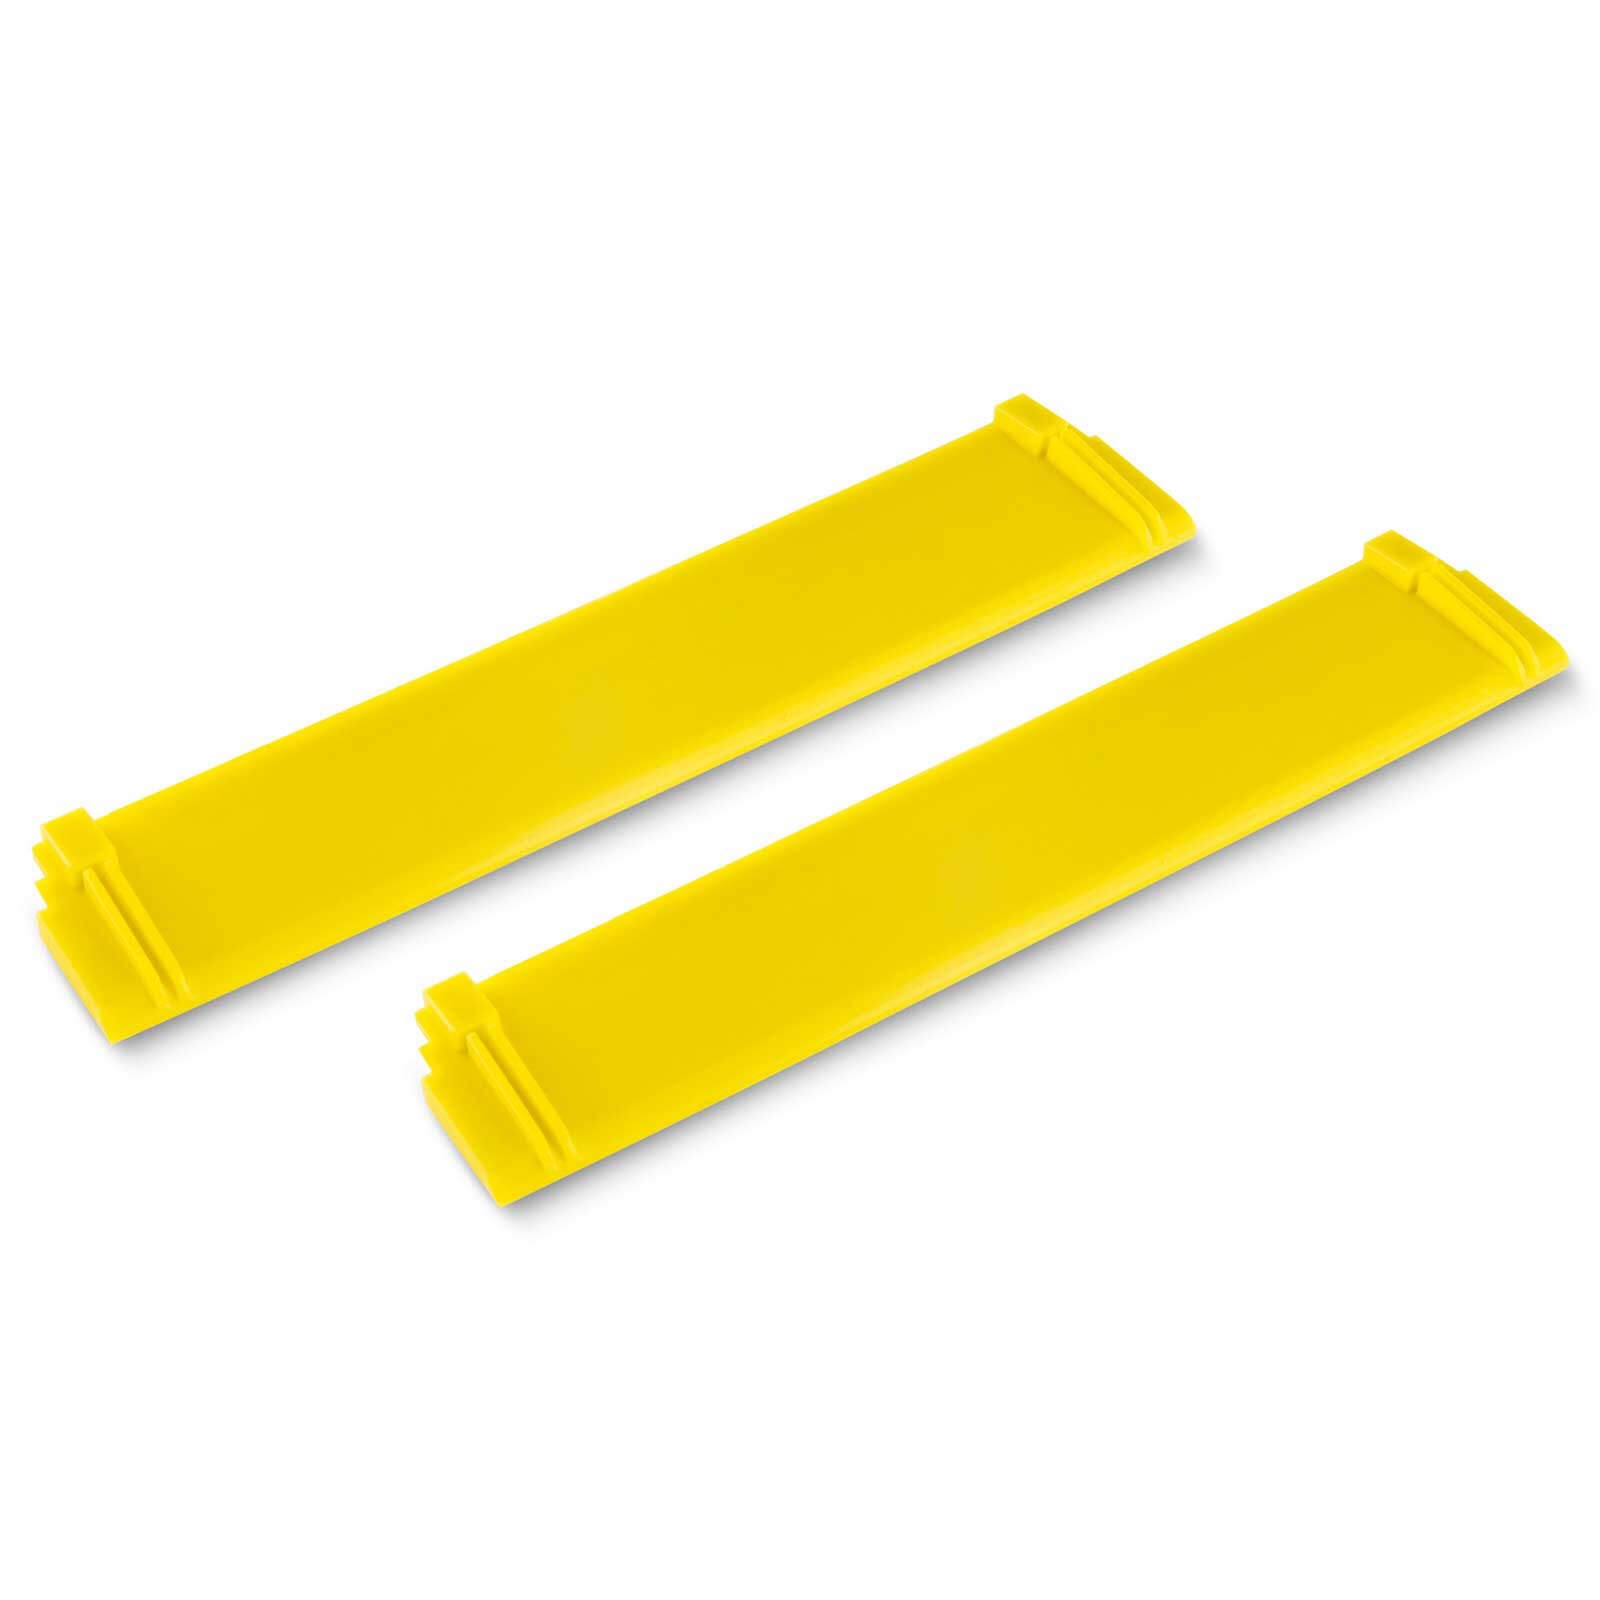 Image of Karcher Suction Lips 170mm for WV 6 Window Vacs Pack of 2